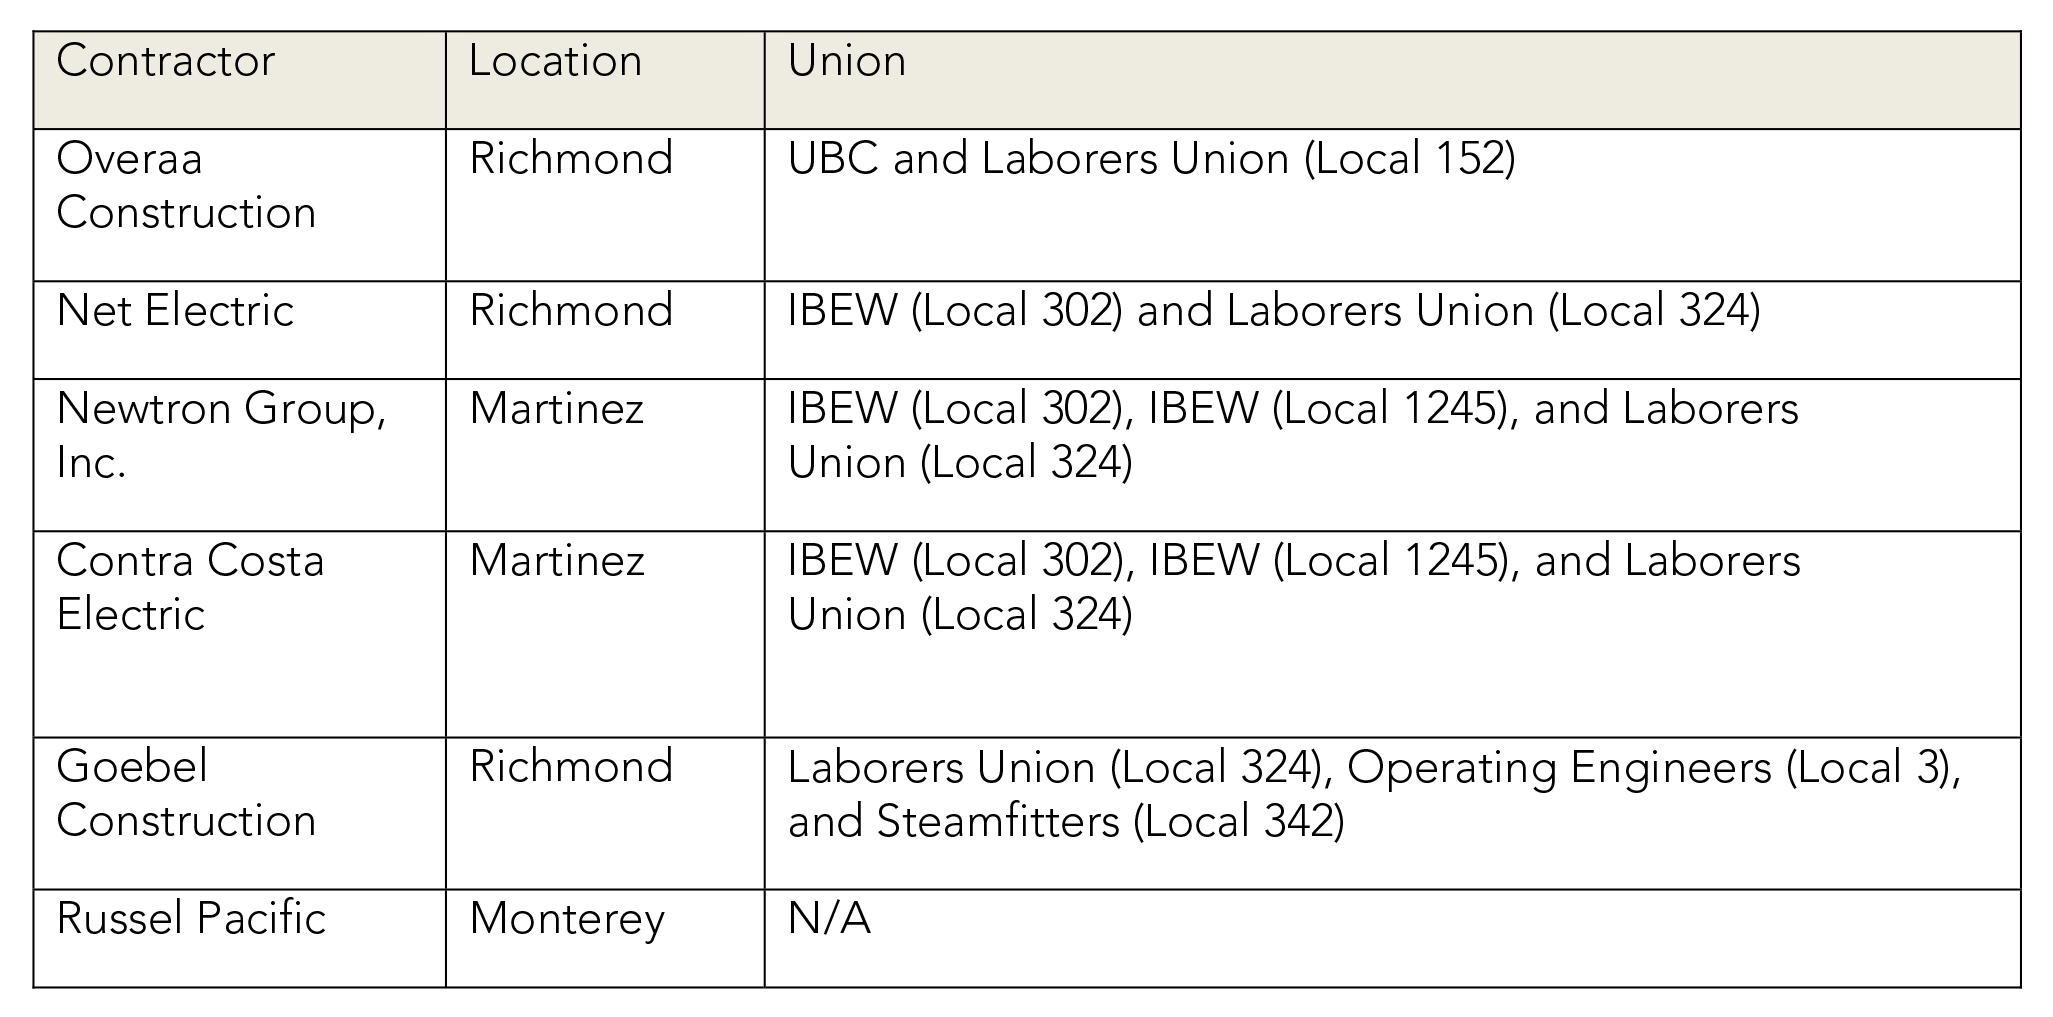 table illustration, shows list of contractors working on project and their locations and union affiliation